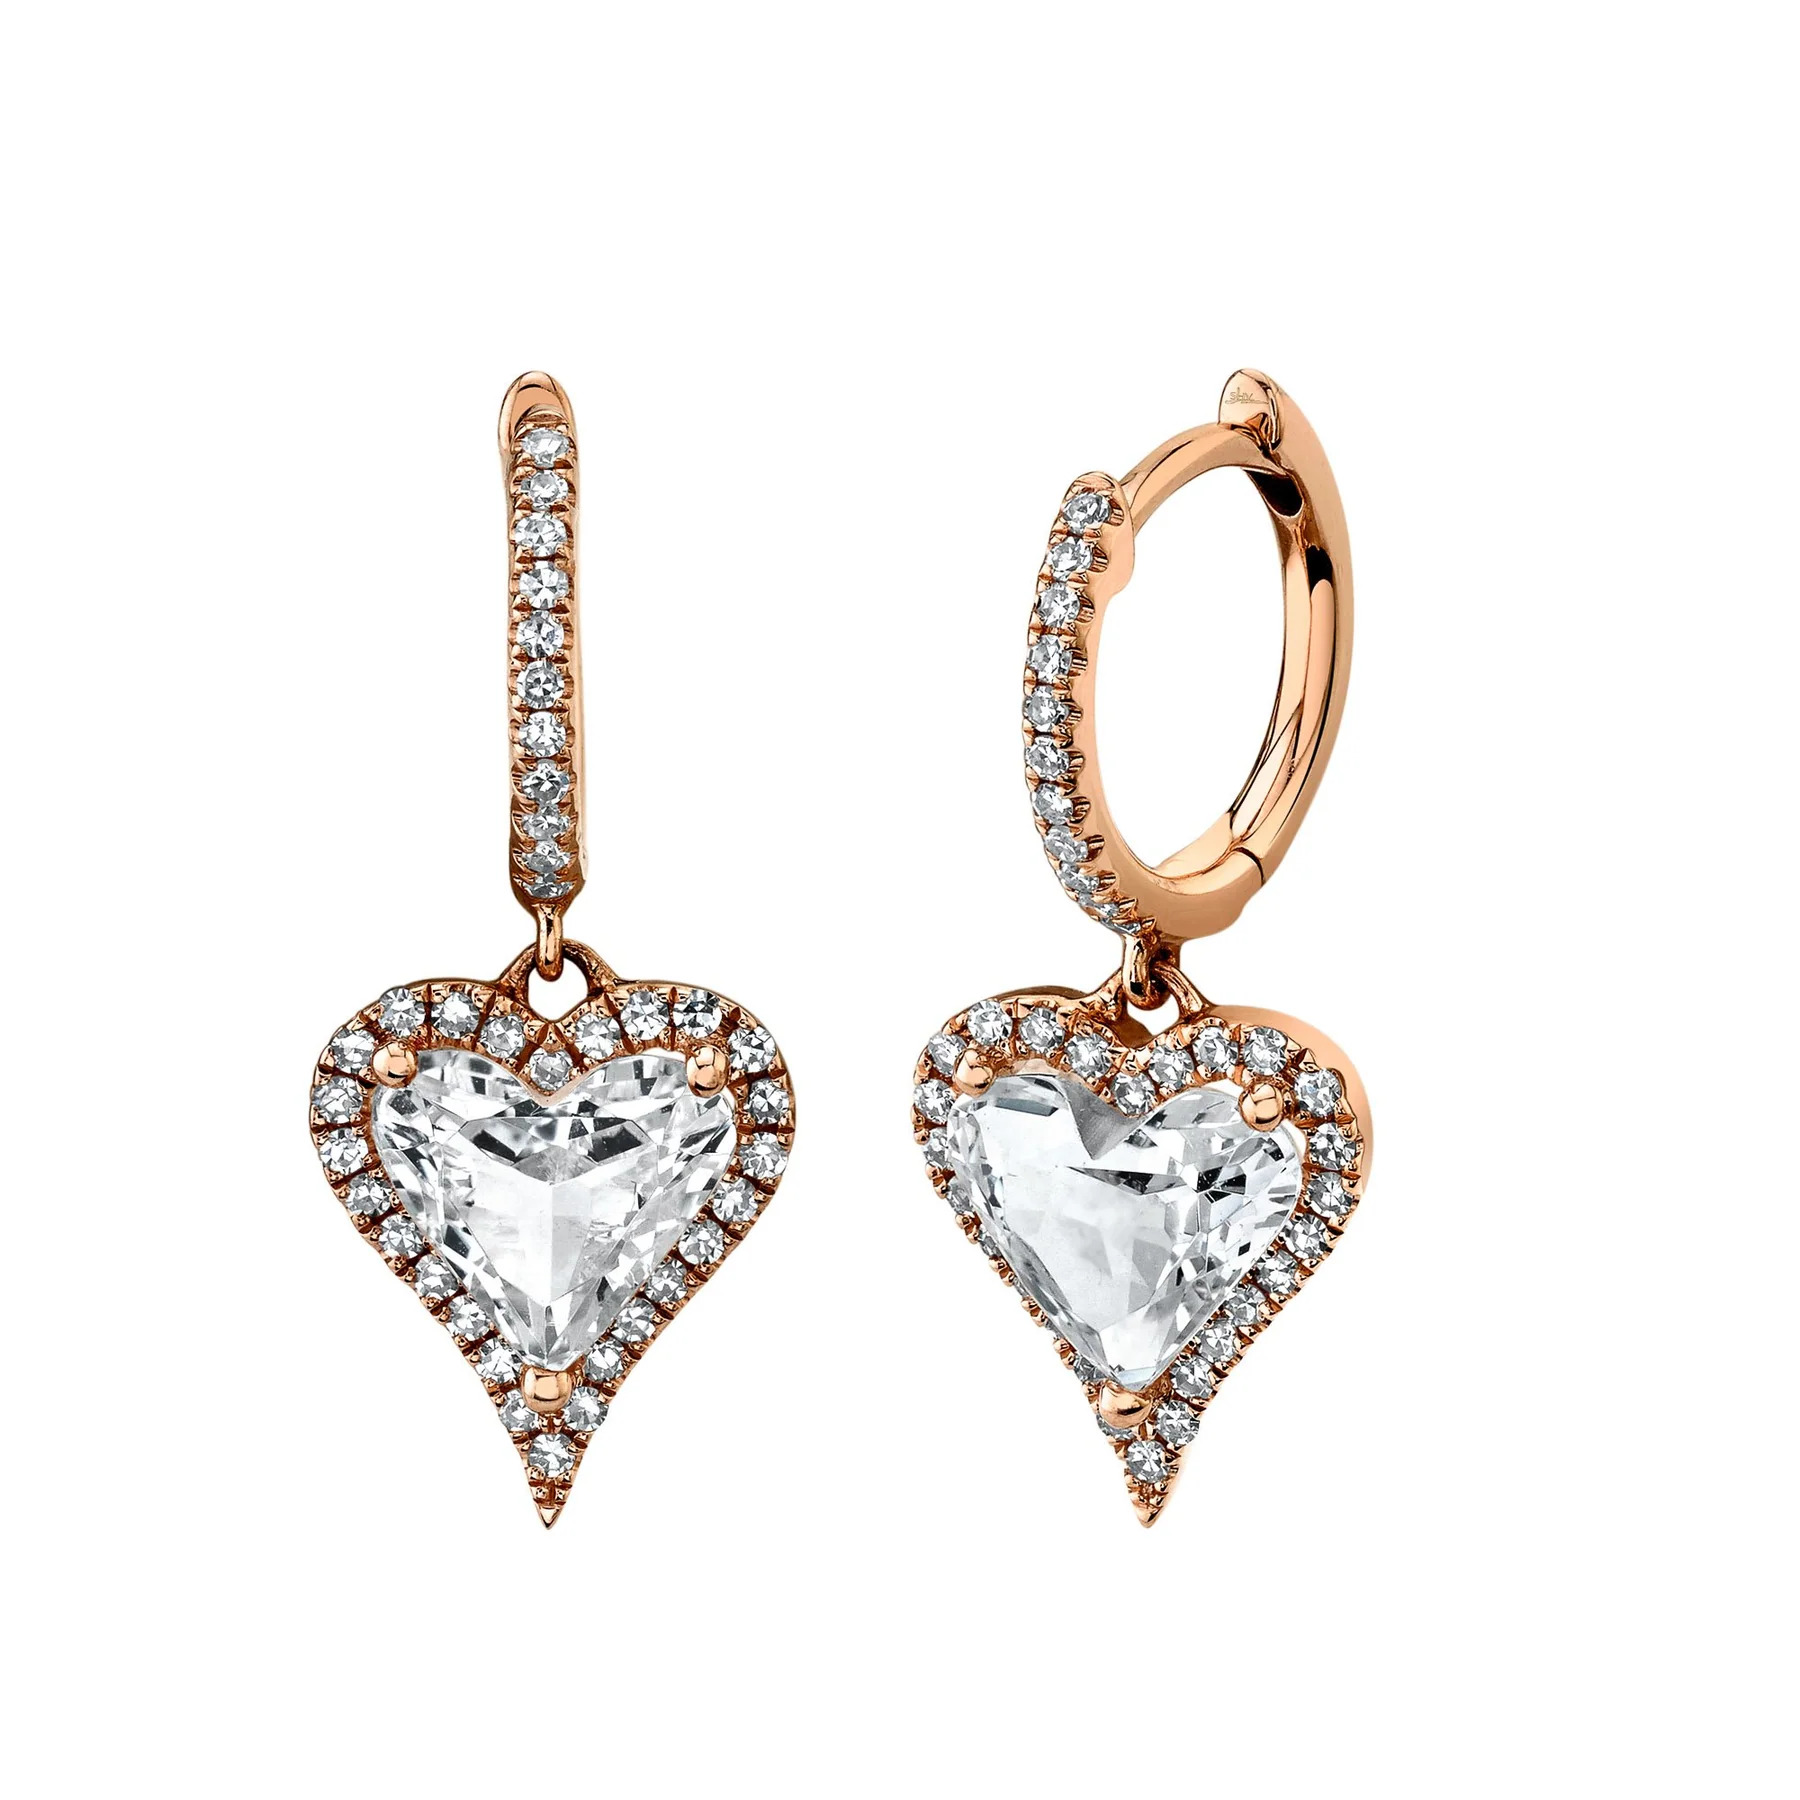 Two rose gold earrings featuring a central heart shape with a white topaz gemstone and surrounded by diamonds. The heart-shaped pendant hangs from the earring band with diamonds.